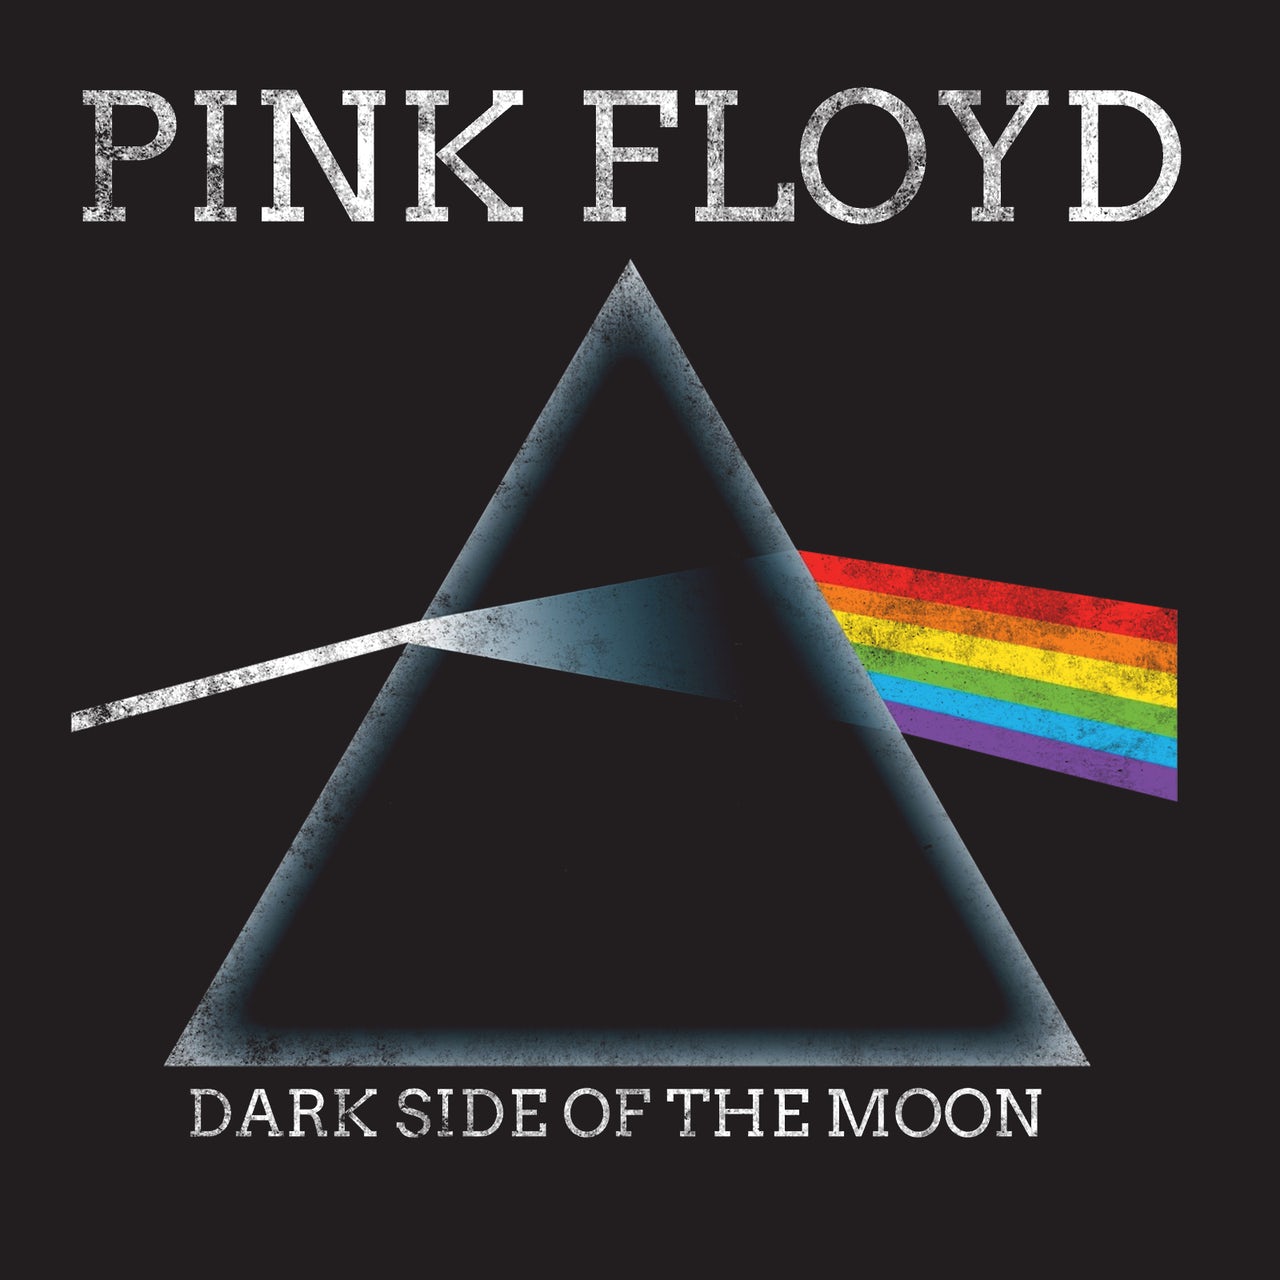 Review ‘The Dark Side of The Moon’ The Silverado Star